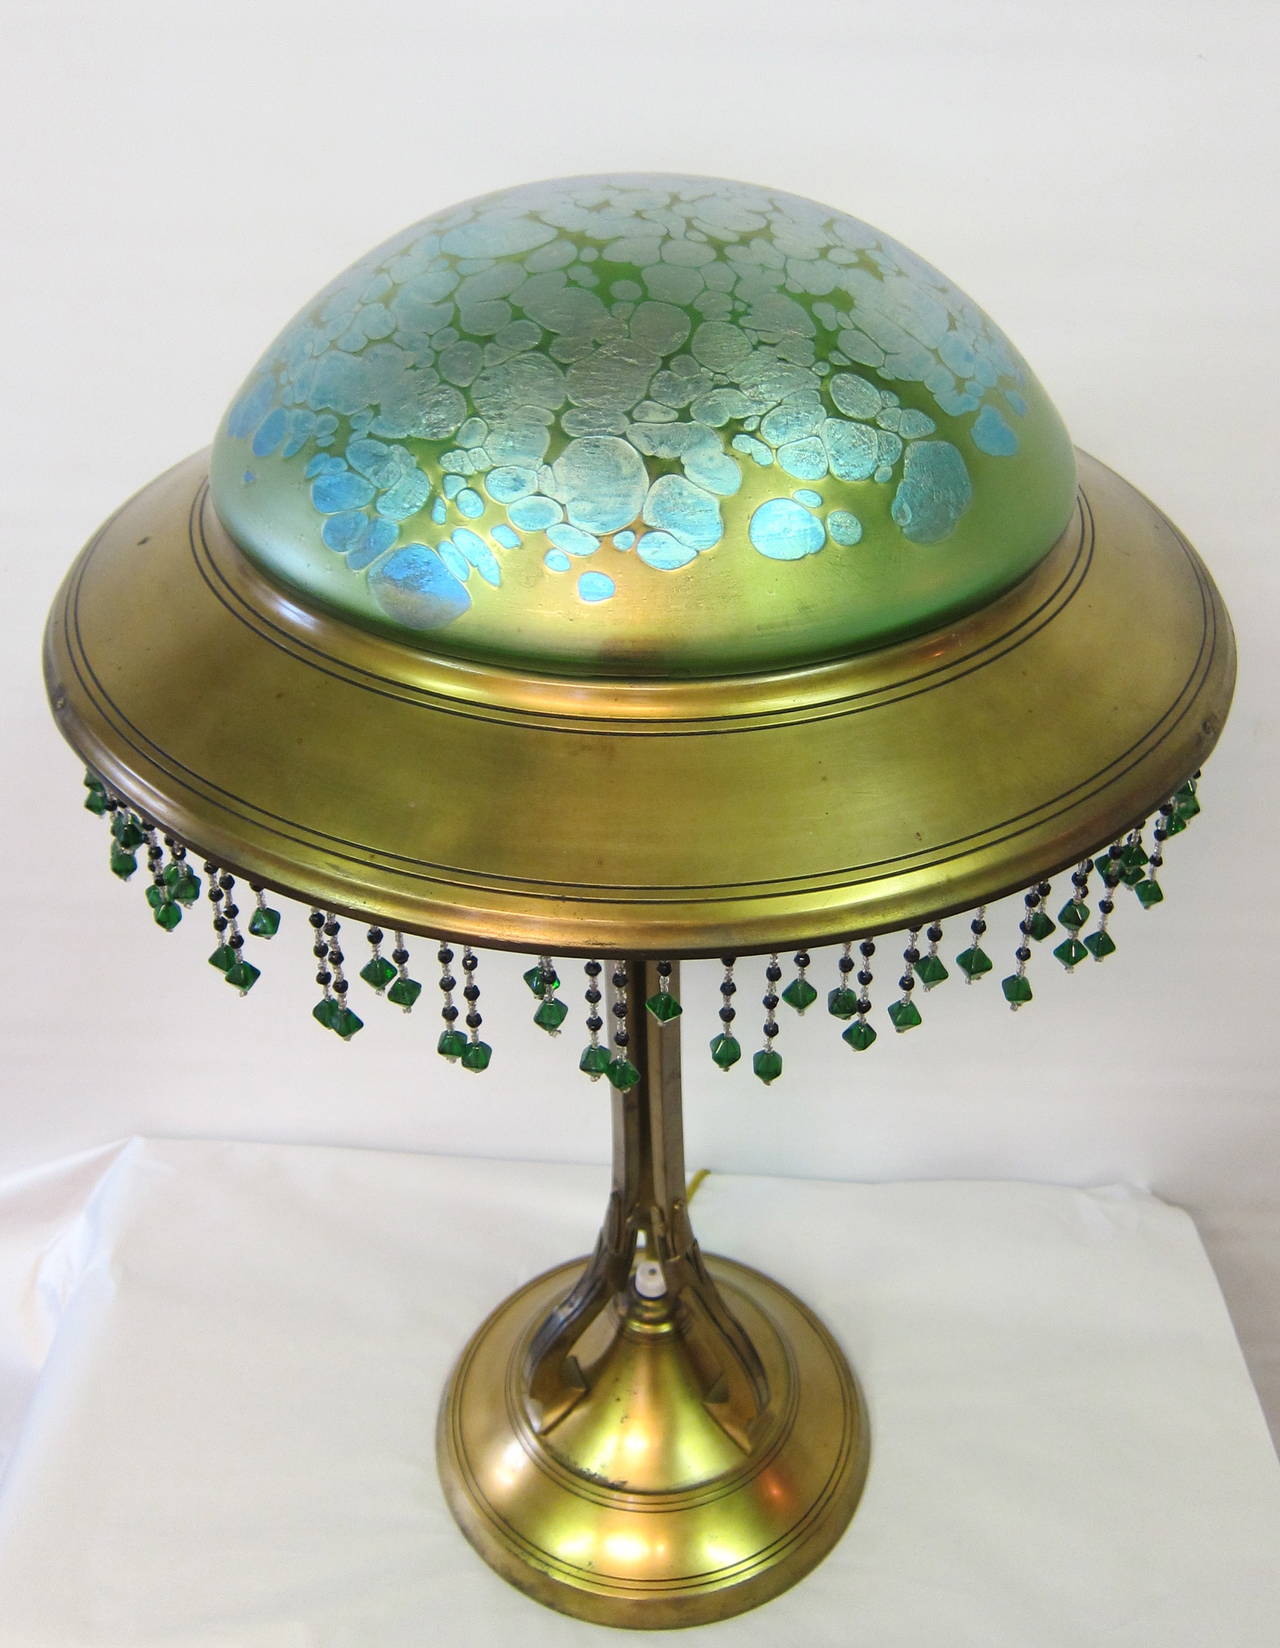 This early 20th century Austrian art nouveau table lamp is from the Loetz factory & has a blue oil stain pattern on green color dome shape shade.
The stunning 12